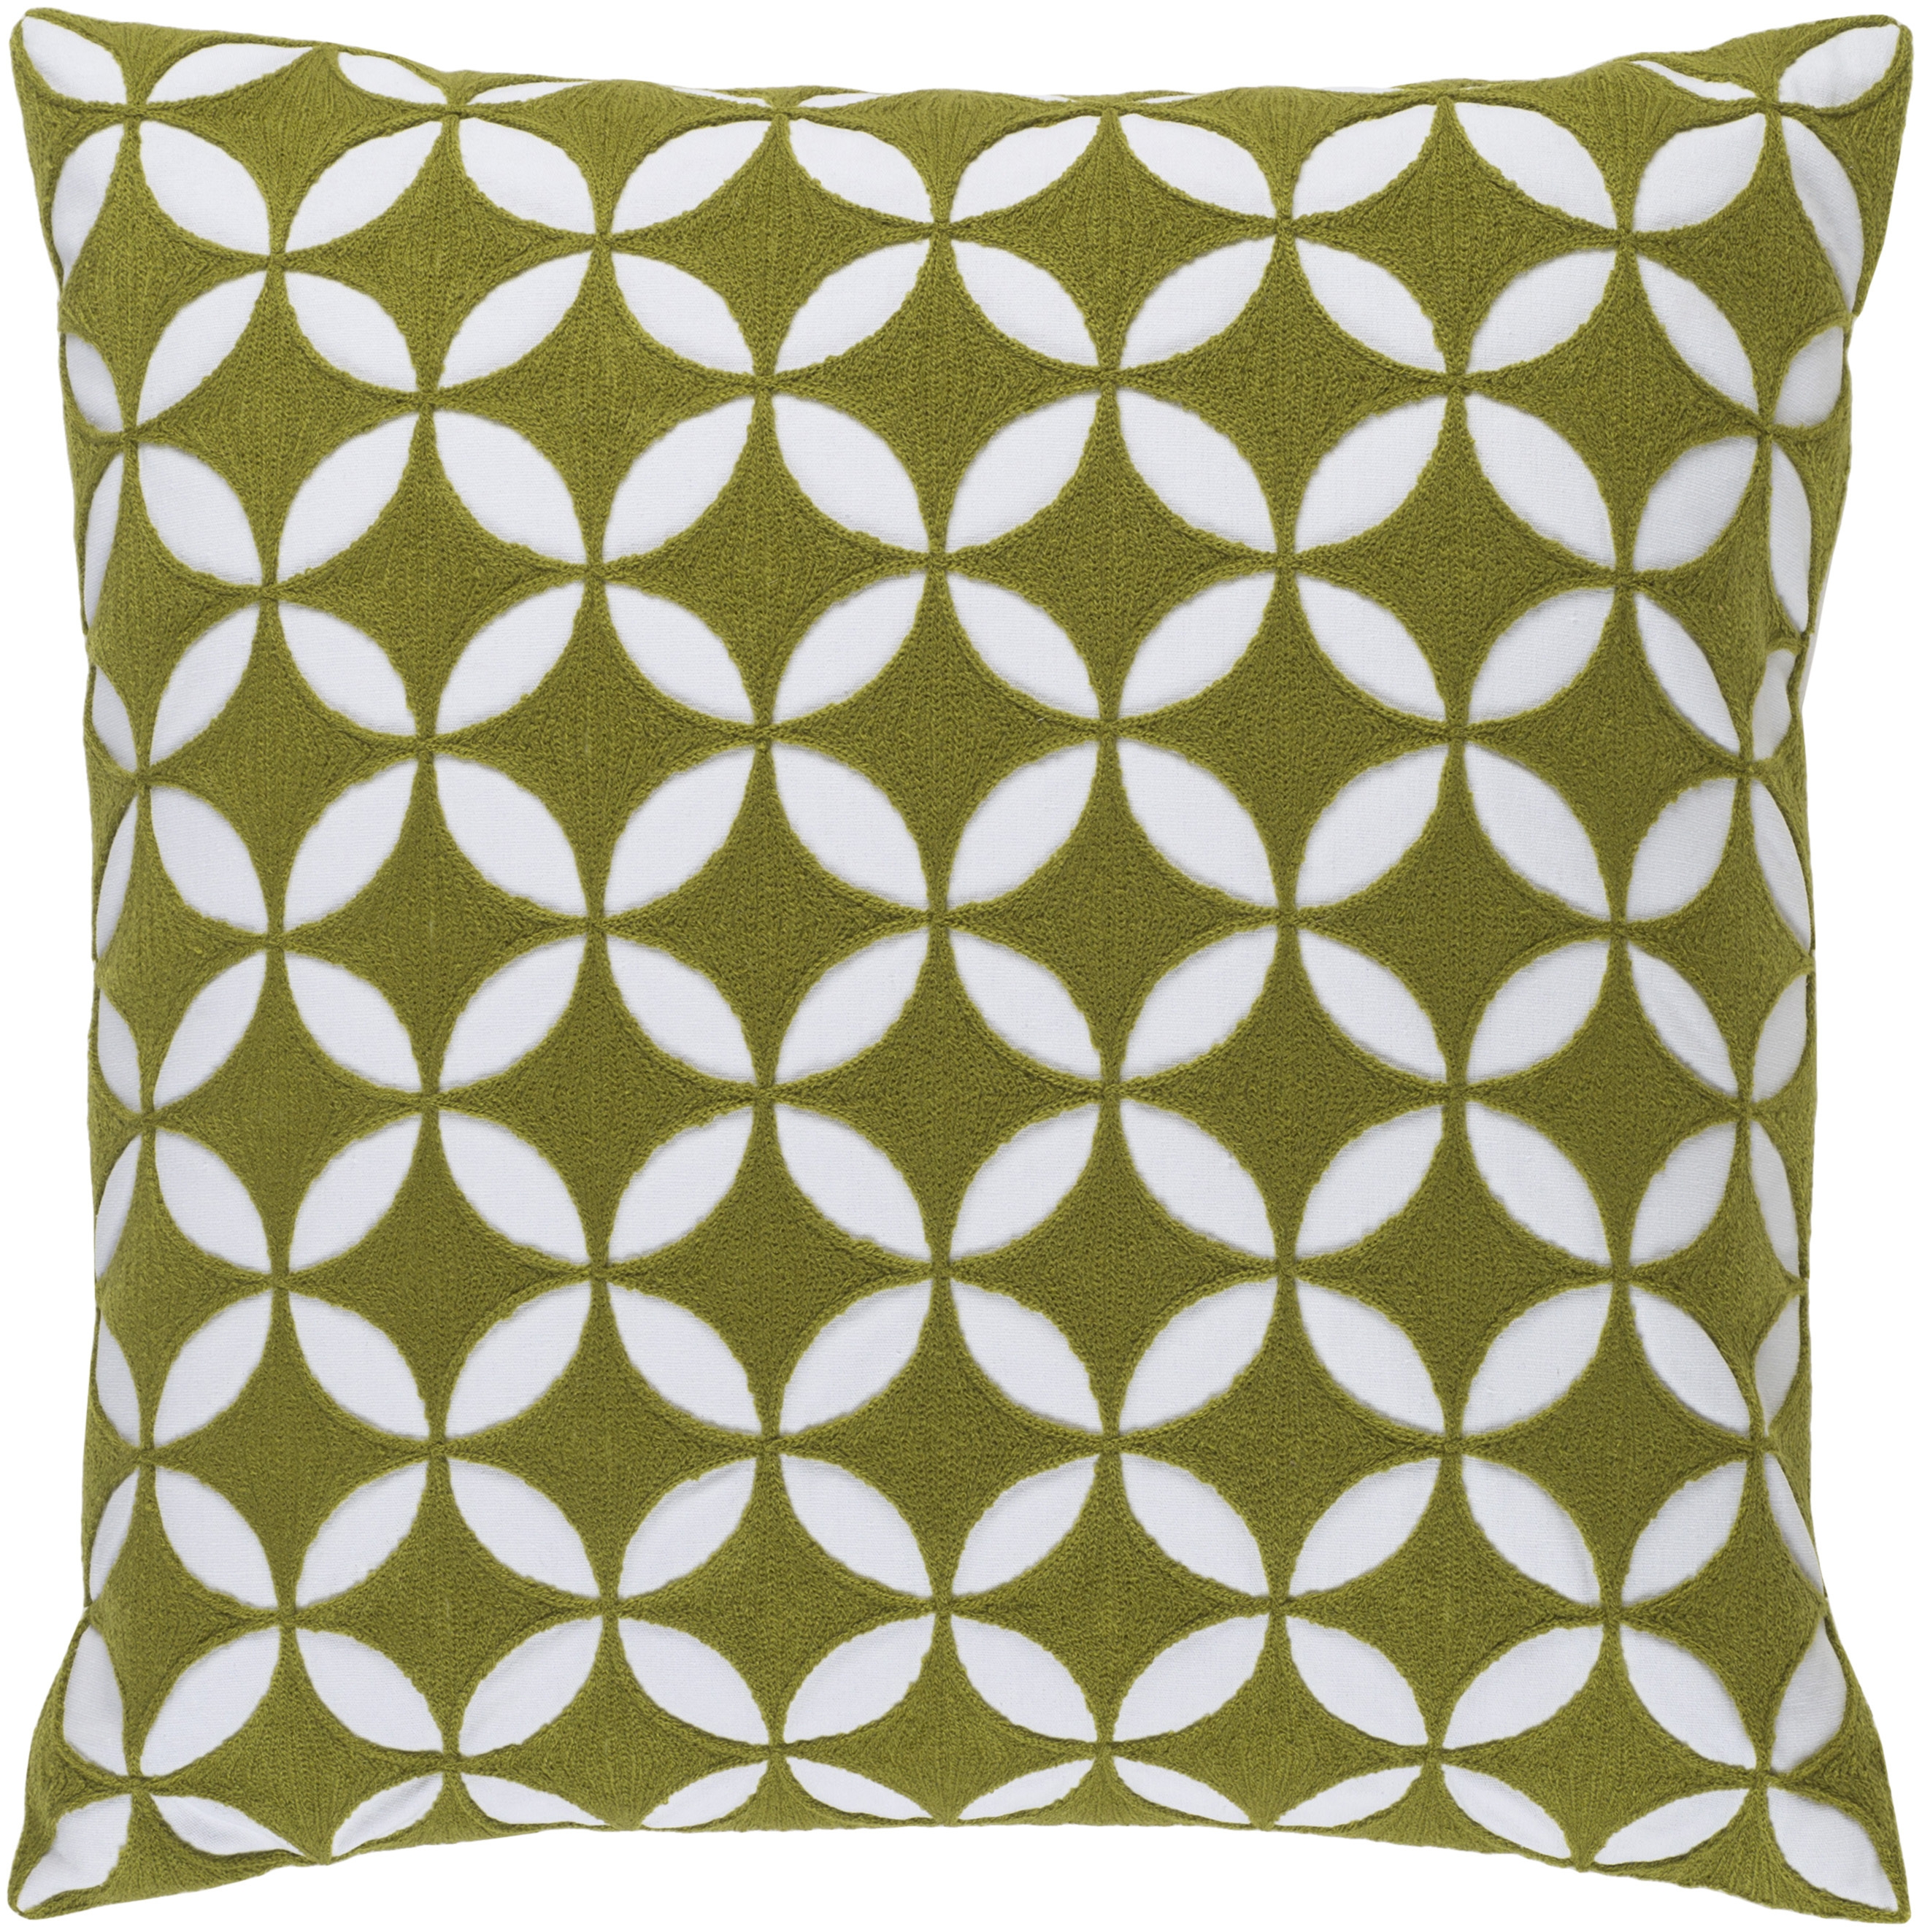 Perimeter Throw Pillow, 18" x 18", pillow cover only - Image 0